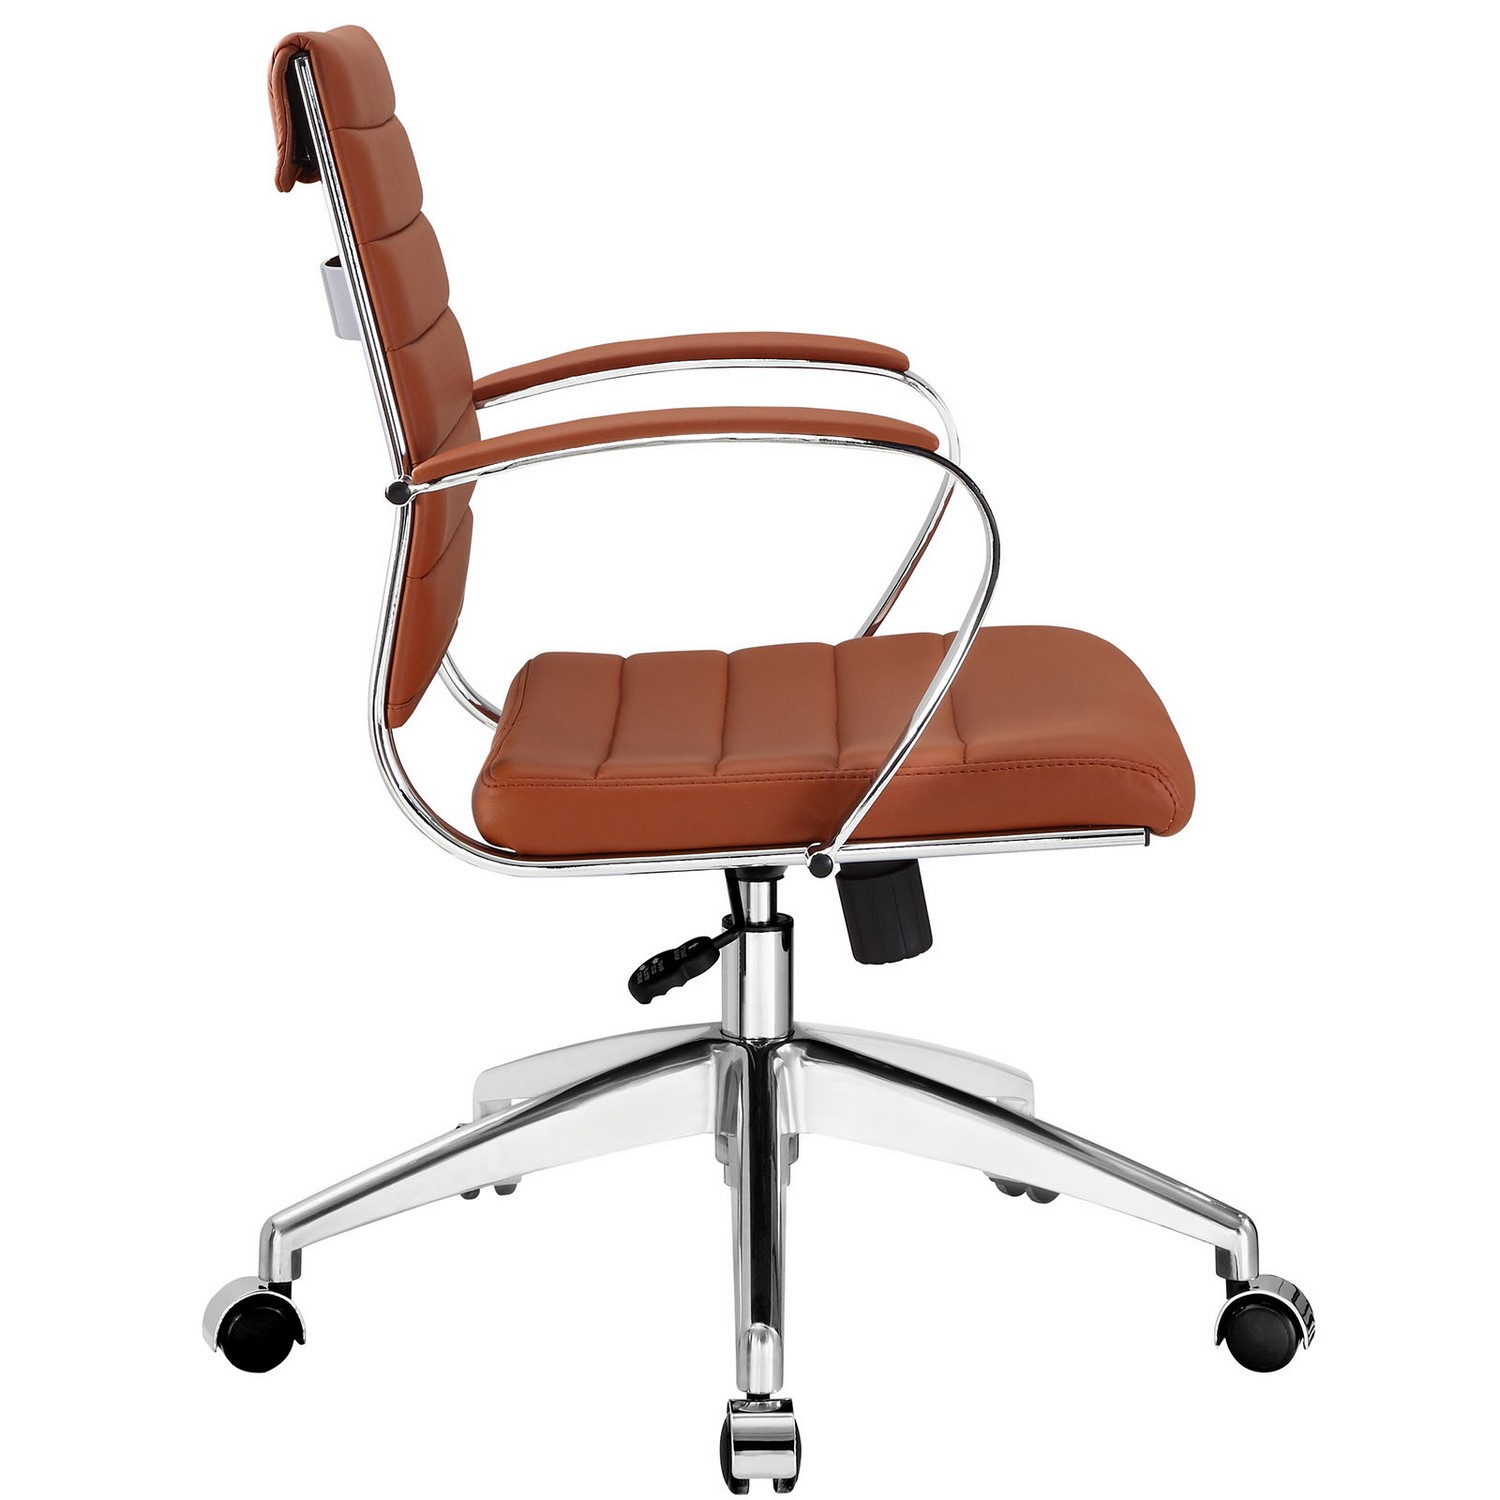 Modway Jive Mid Back Office Chair - Terracotta